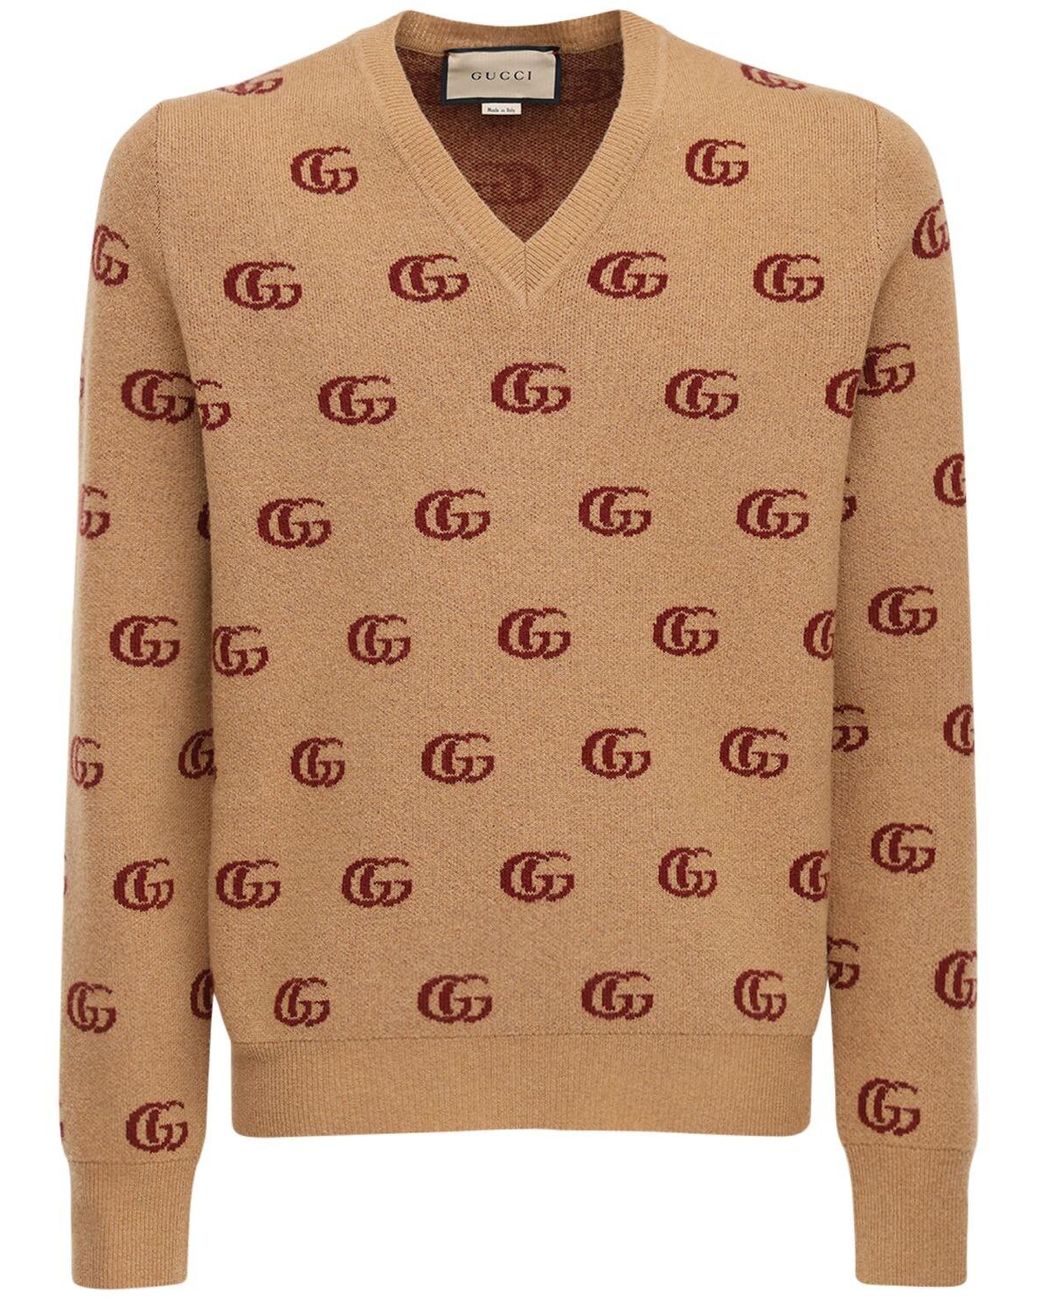 Gucci Double G Jacquard Wool V-neck Sweater for Men - Lyst